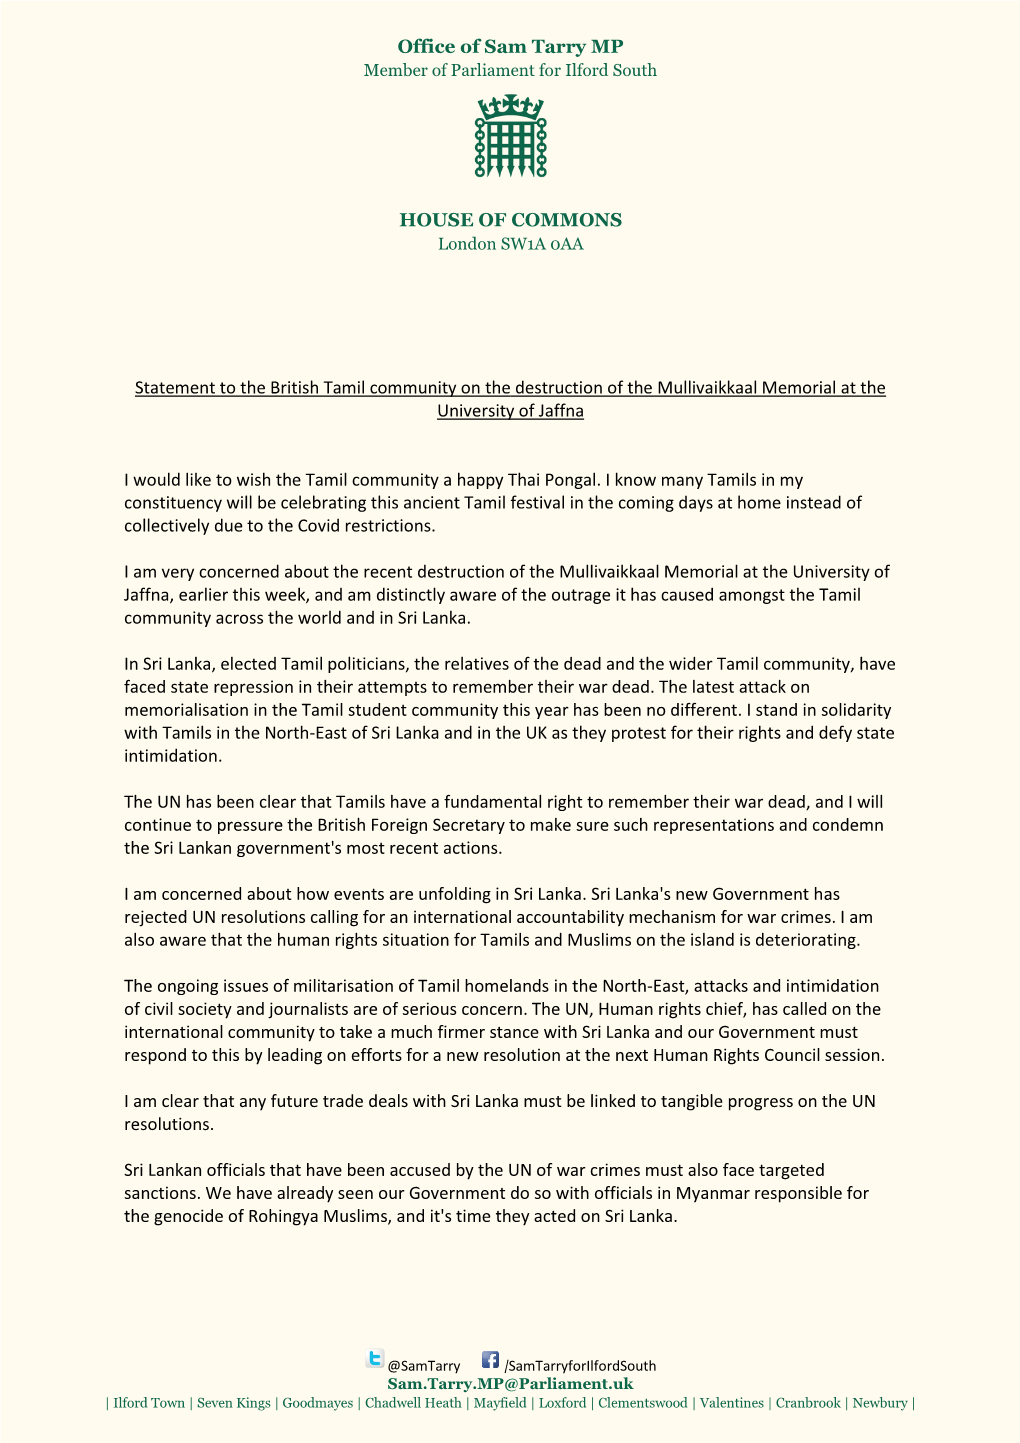 Office of Sam Tarry MP HOUSE of COMMONS Statement to the British